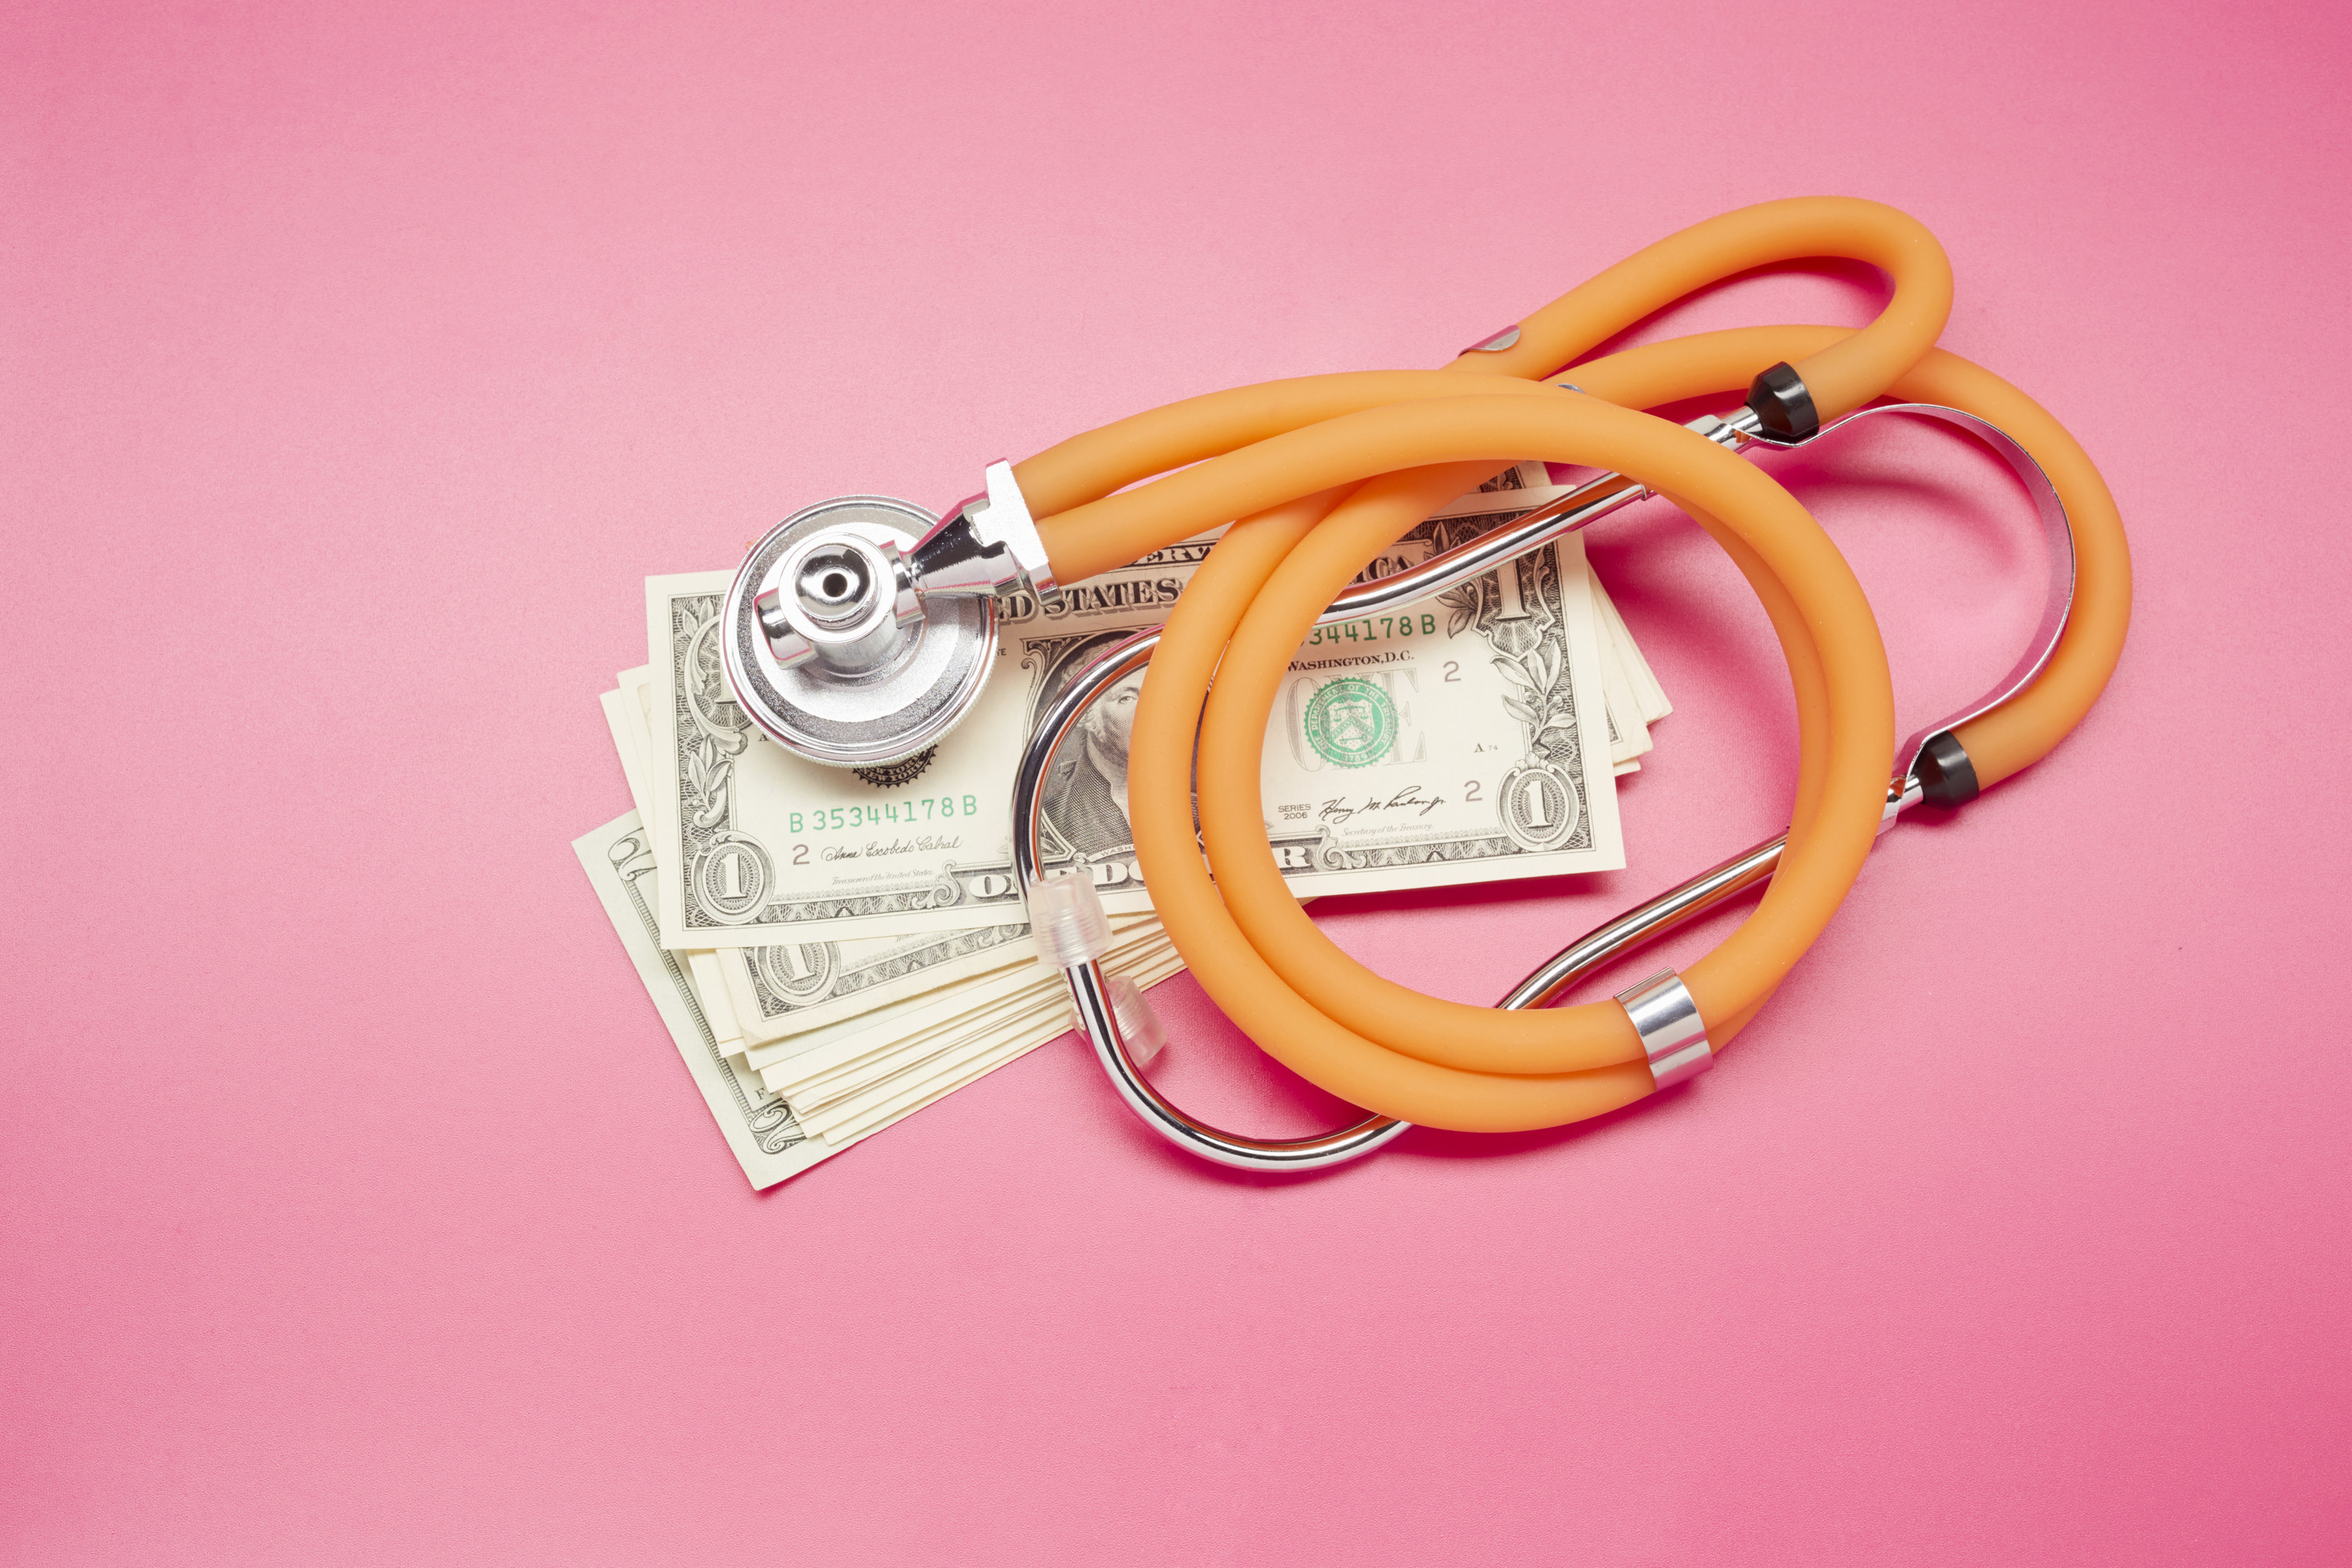 Stethoscope on a pile of cash